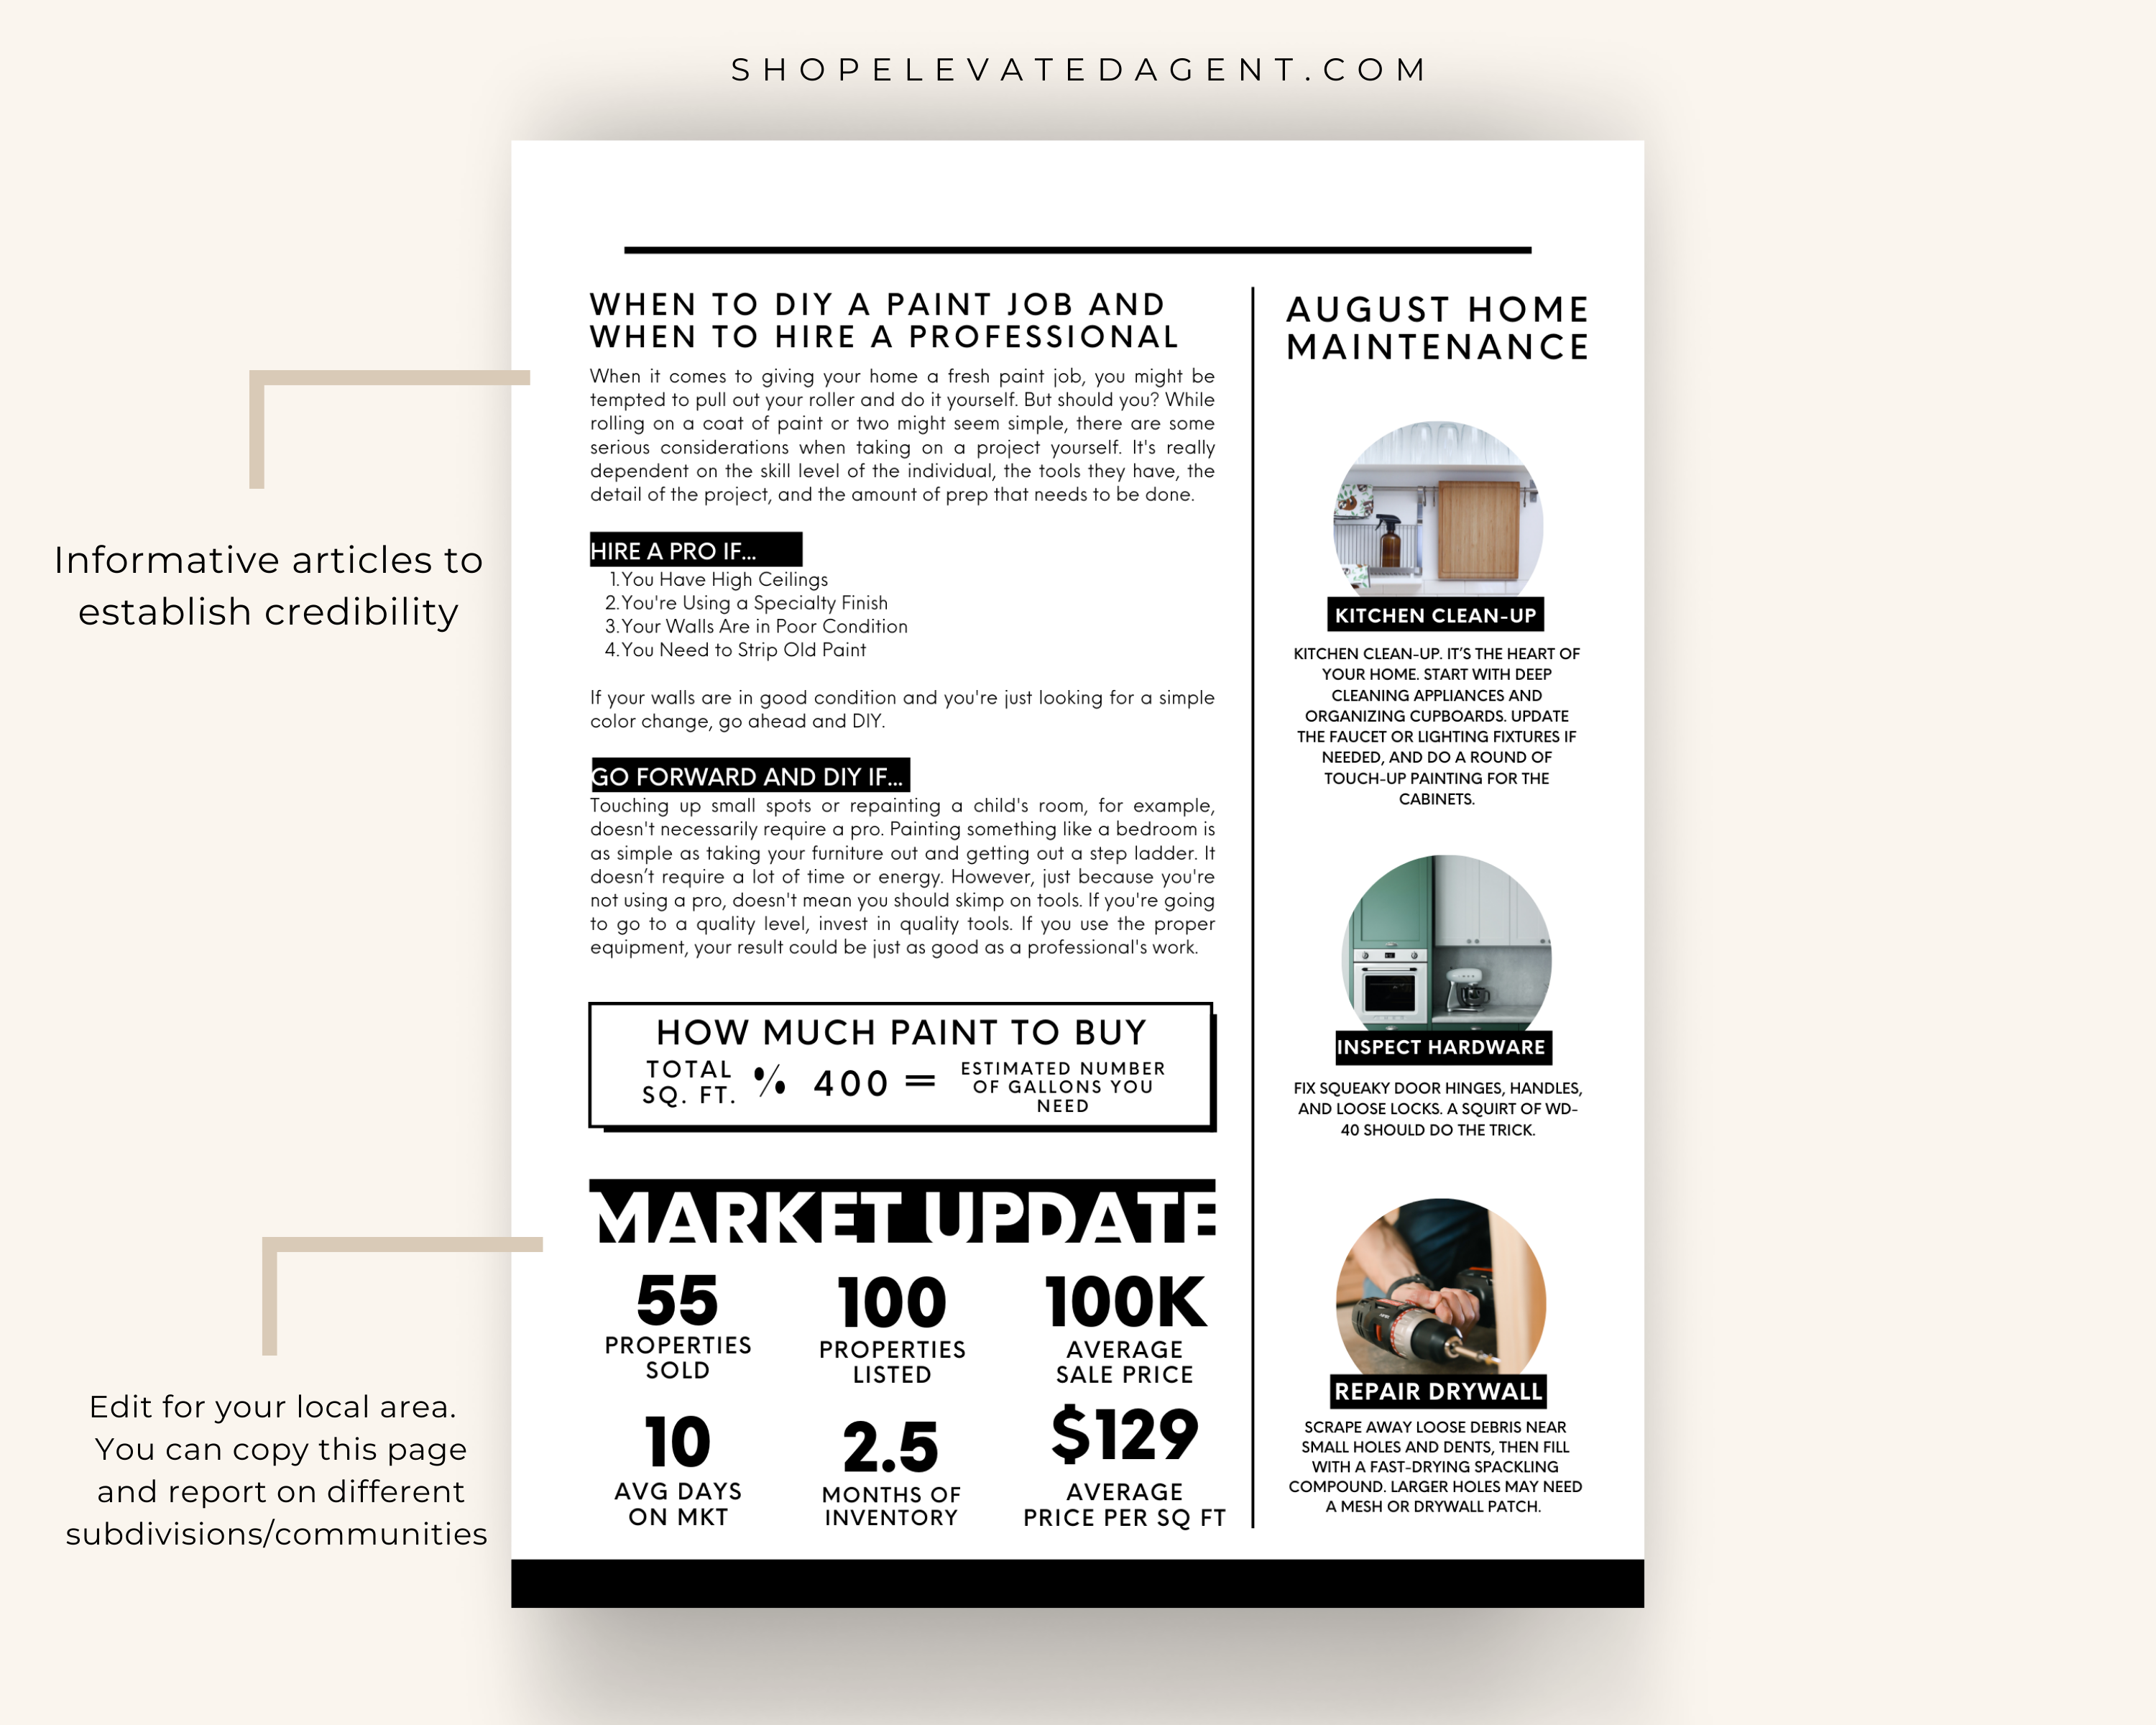 August Newsletter Template Real Estate Template for Newsletter Real Estate Newsletter Template for Realtors Real Estate Newsletter Template 